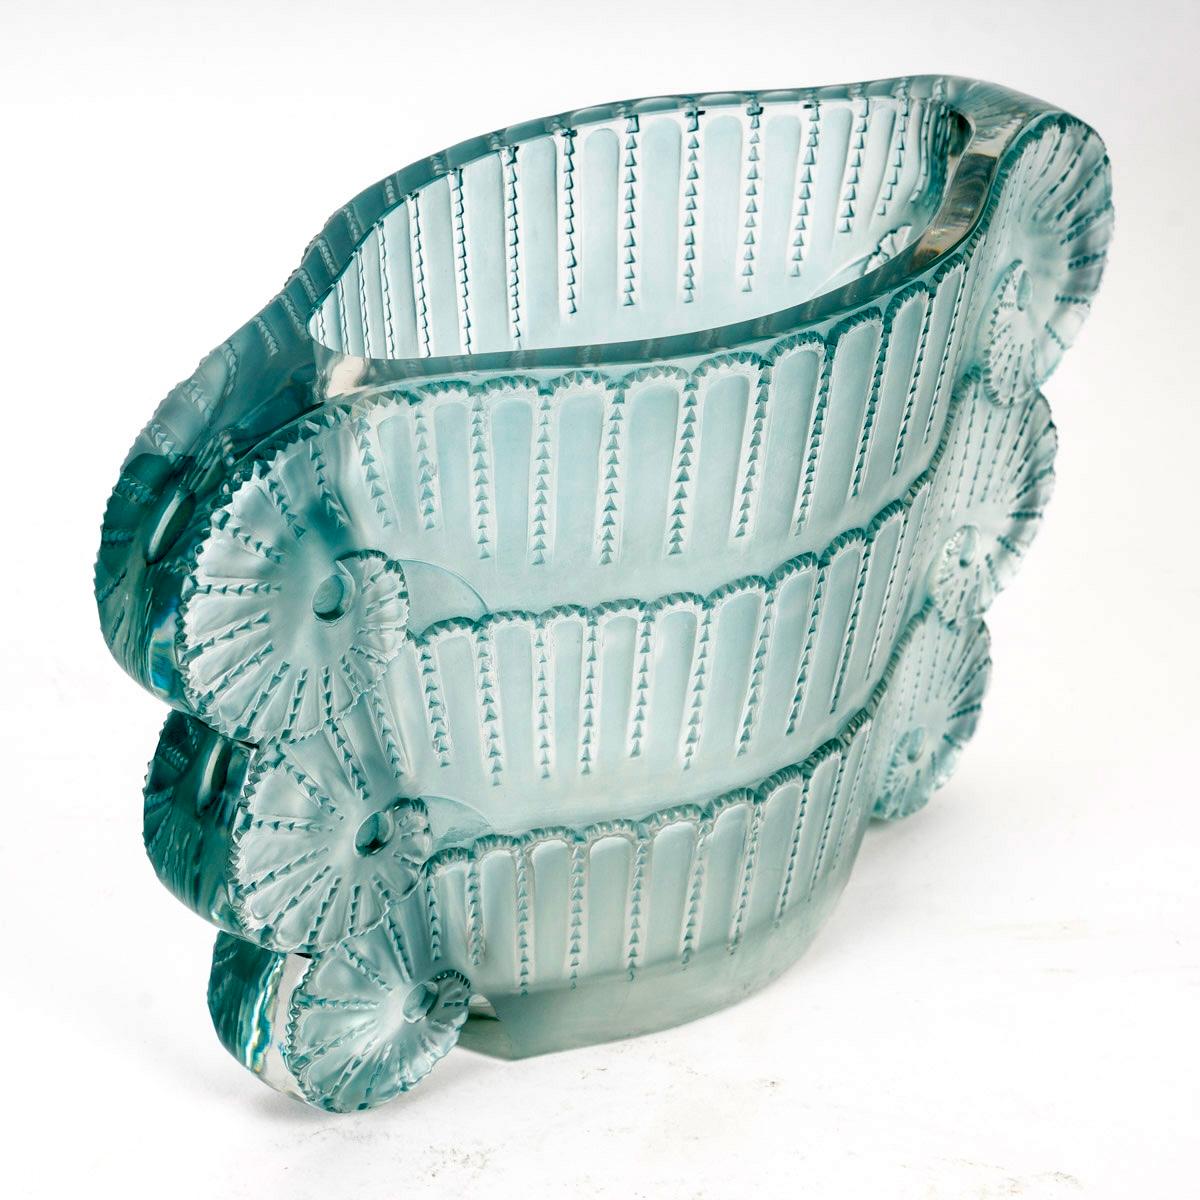 Art Deco 1937 René Lalique Jaffa Vase in Frosted Glass with Turquoise Patina For Sale